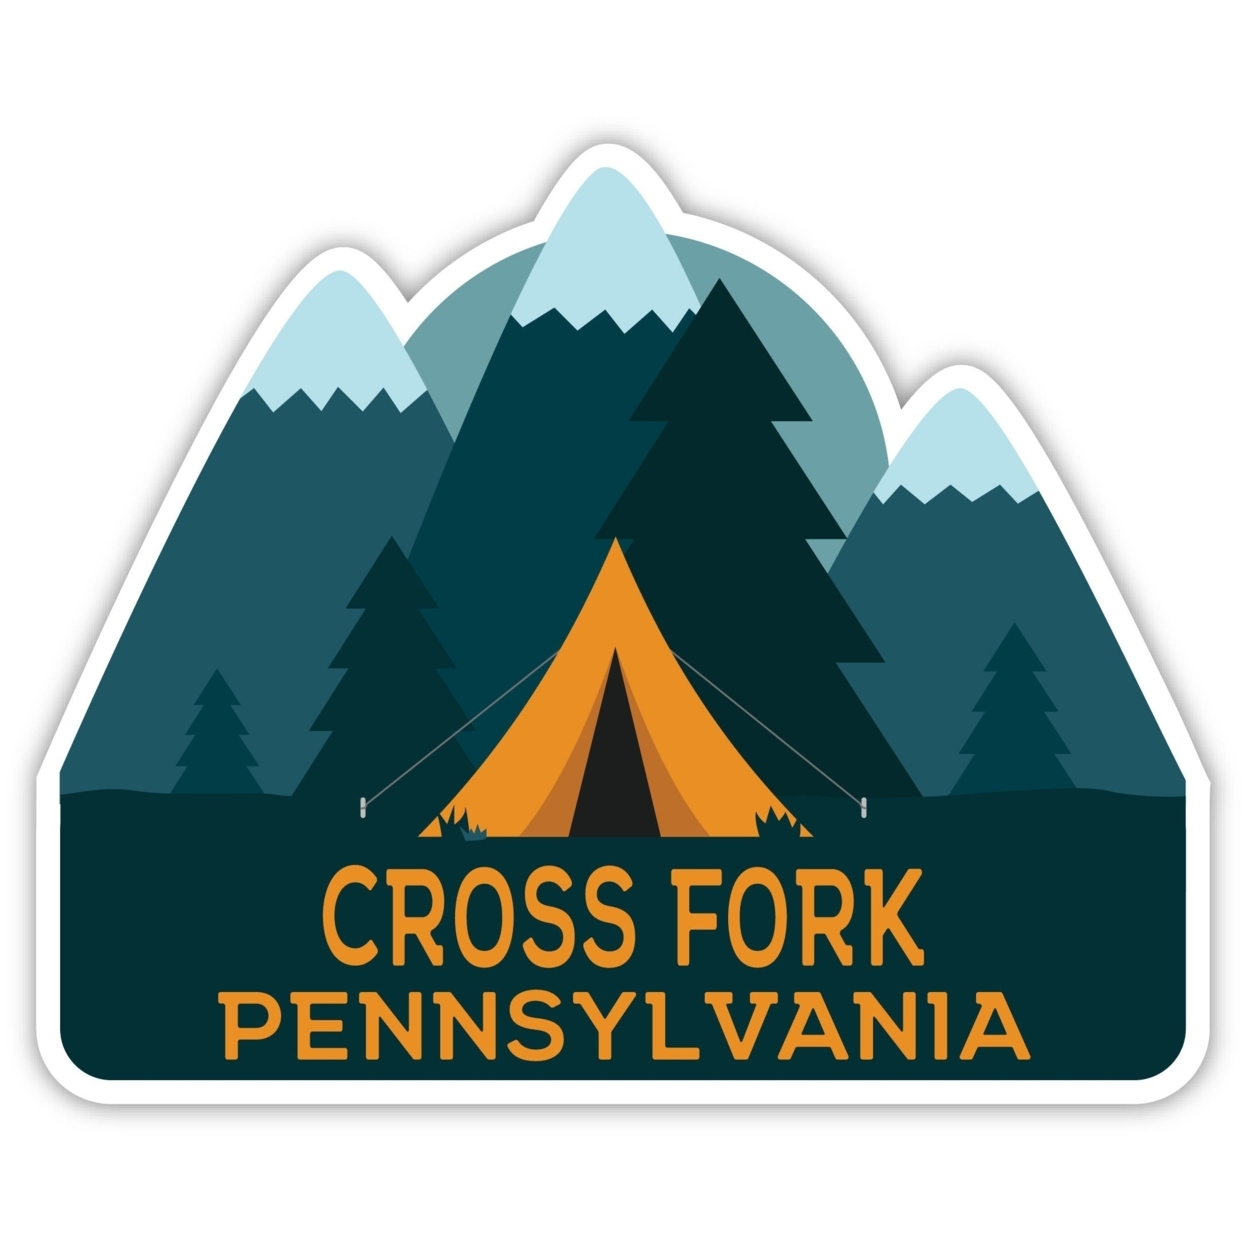 Cross Fork Pennsylvania Souvenir Decorative Stickers (Choose Theme And Size) - 4-Pack, 10-Inch, Tent